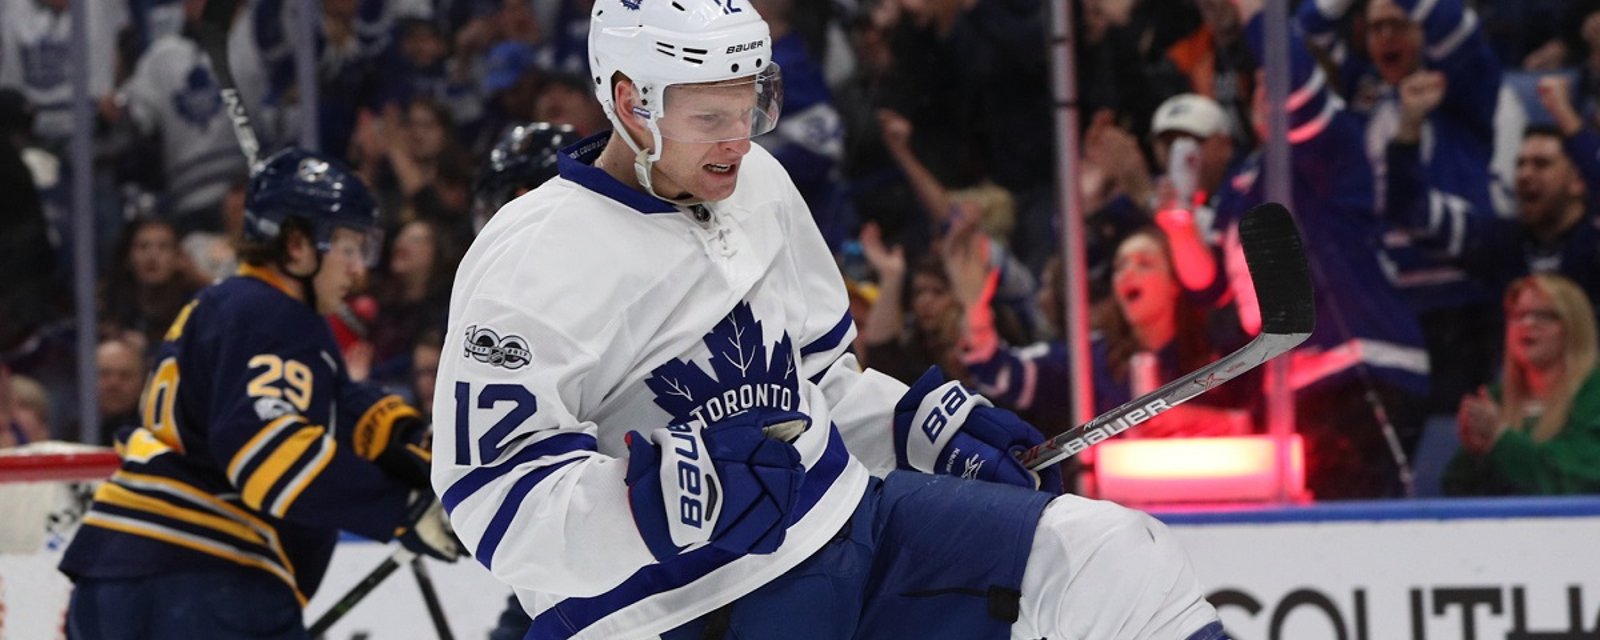  Young Maple Leaf expected to give up his number after big offseason moves from his team.